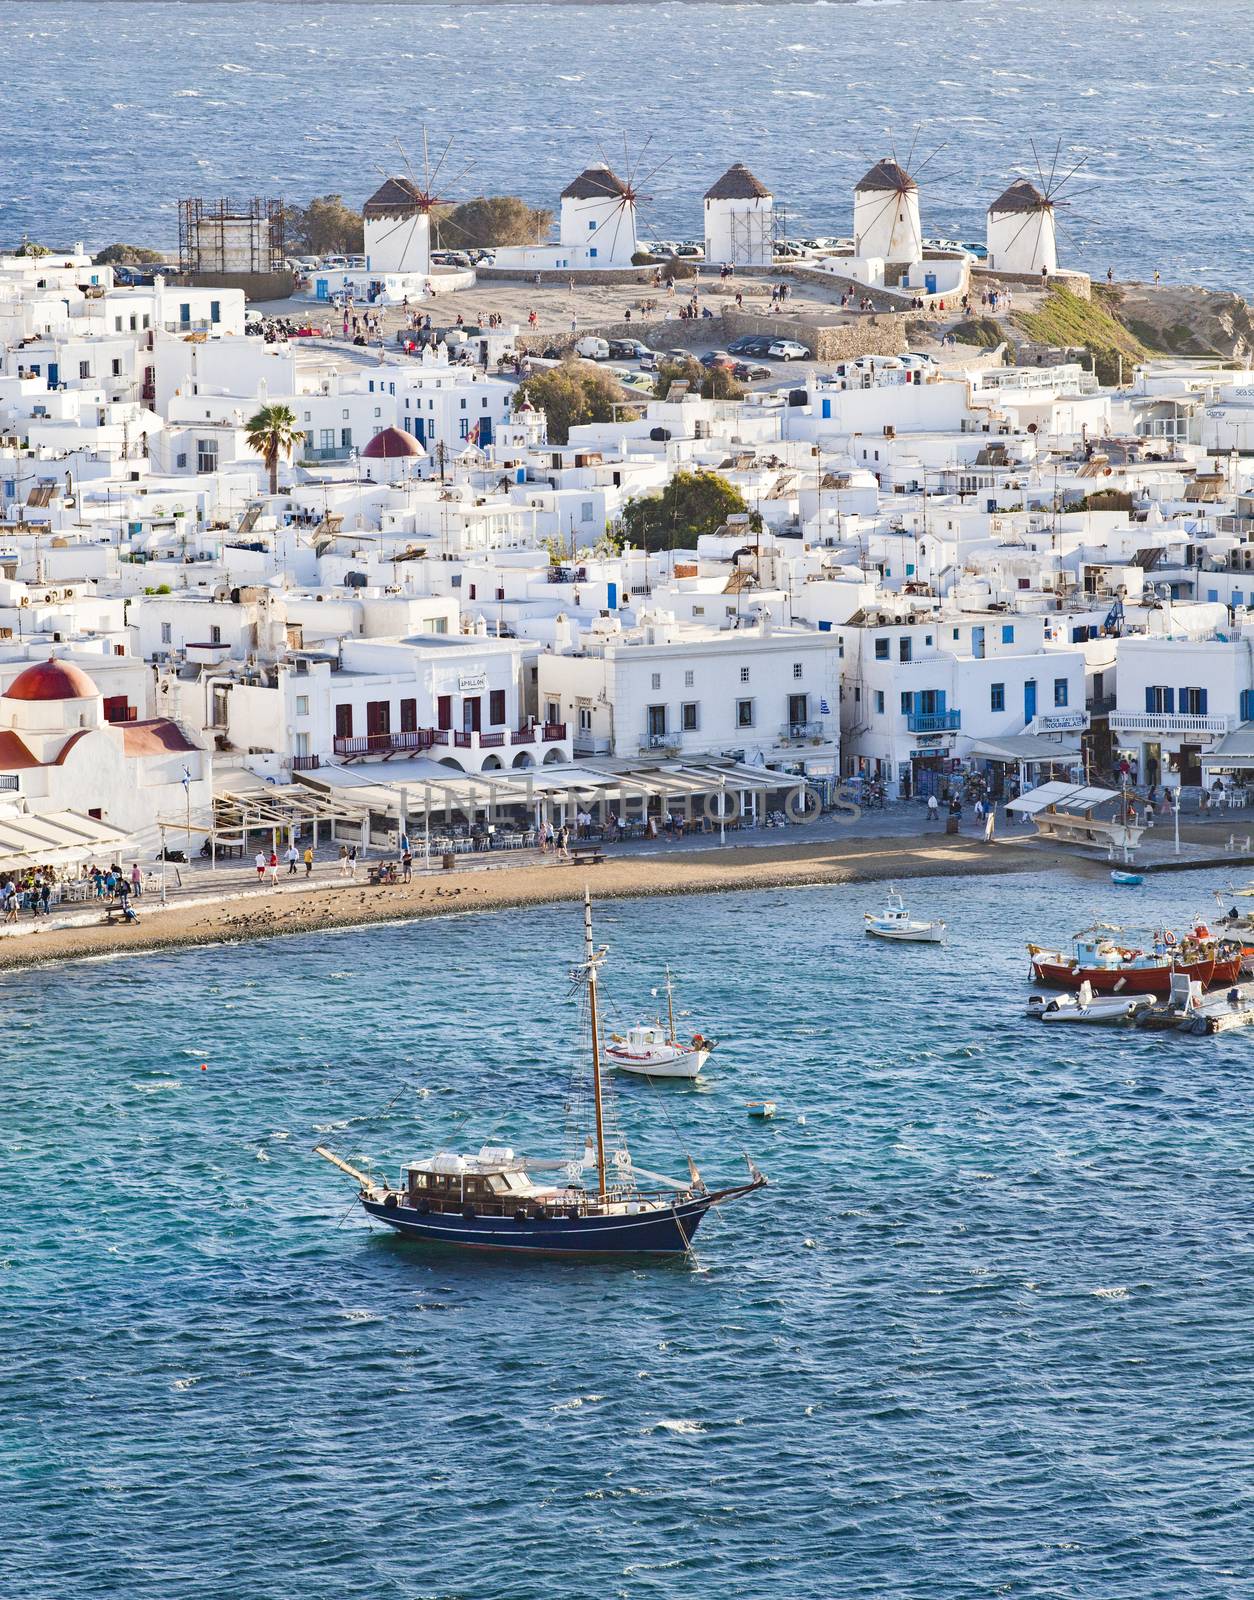 panoramic view of the Mykonos town harbor with famous windmills from the above hills on a sunny summer day, Mykonos, Cyclades, Greece